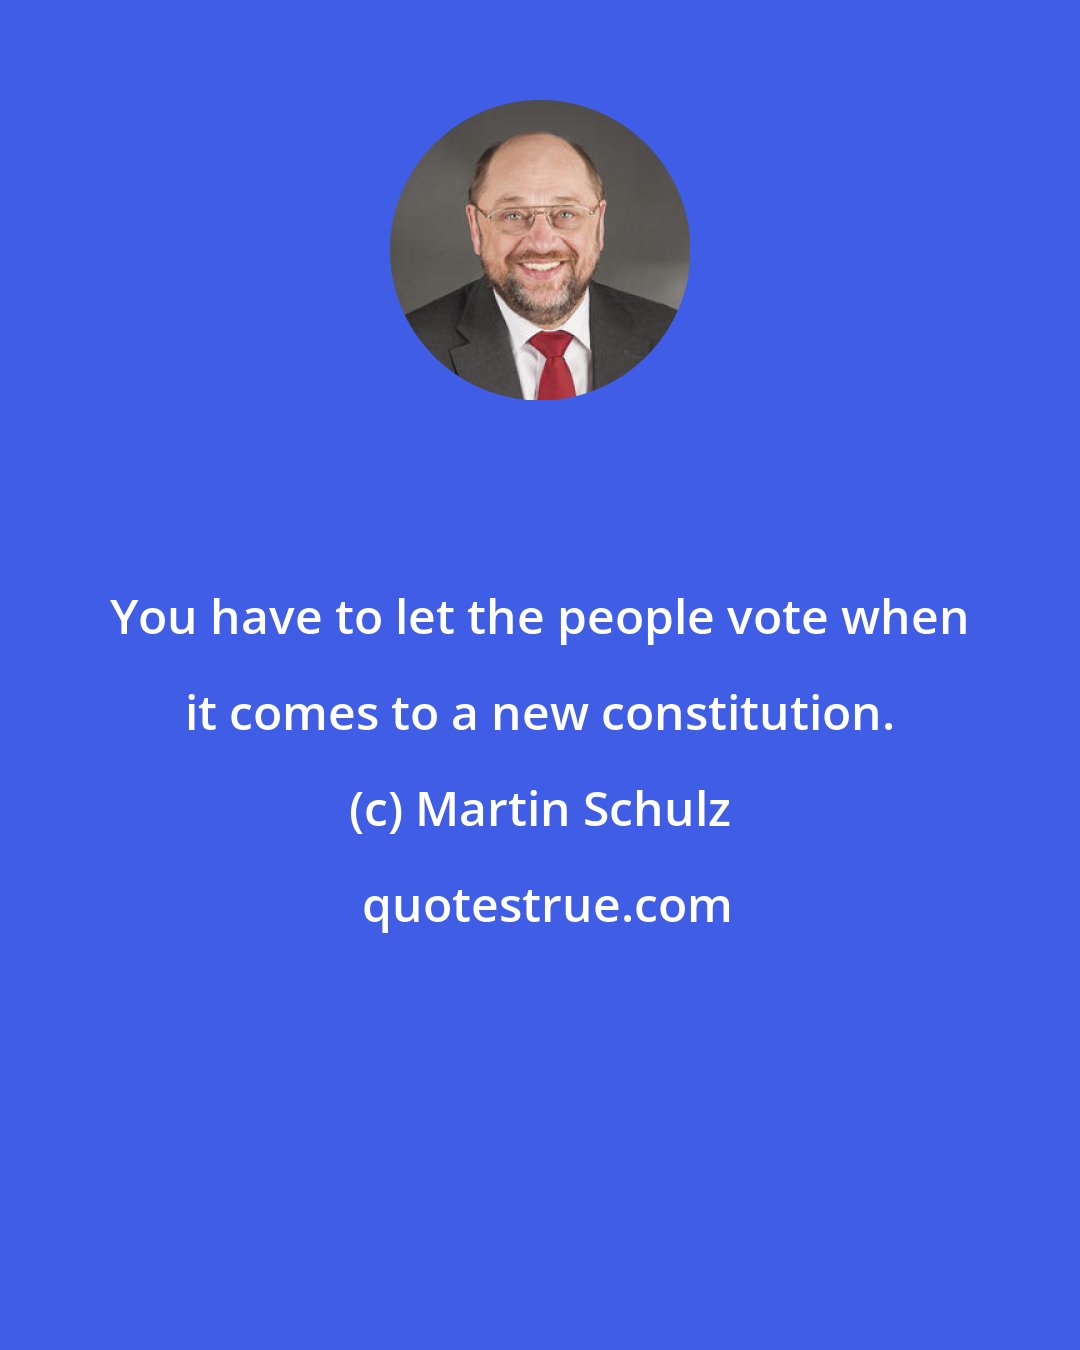 Martin Schulz: You have to let the people vote when it comes to a new constitution.